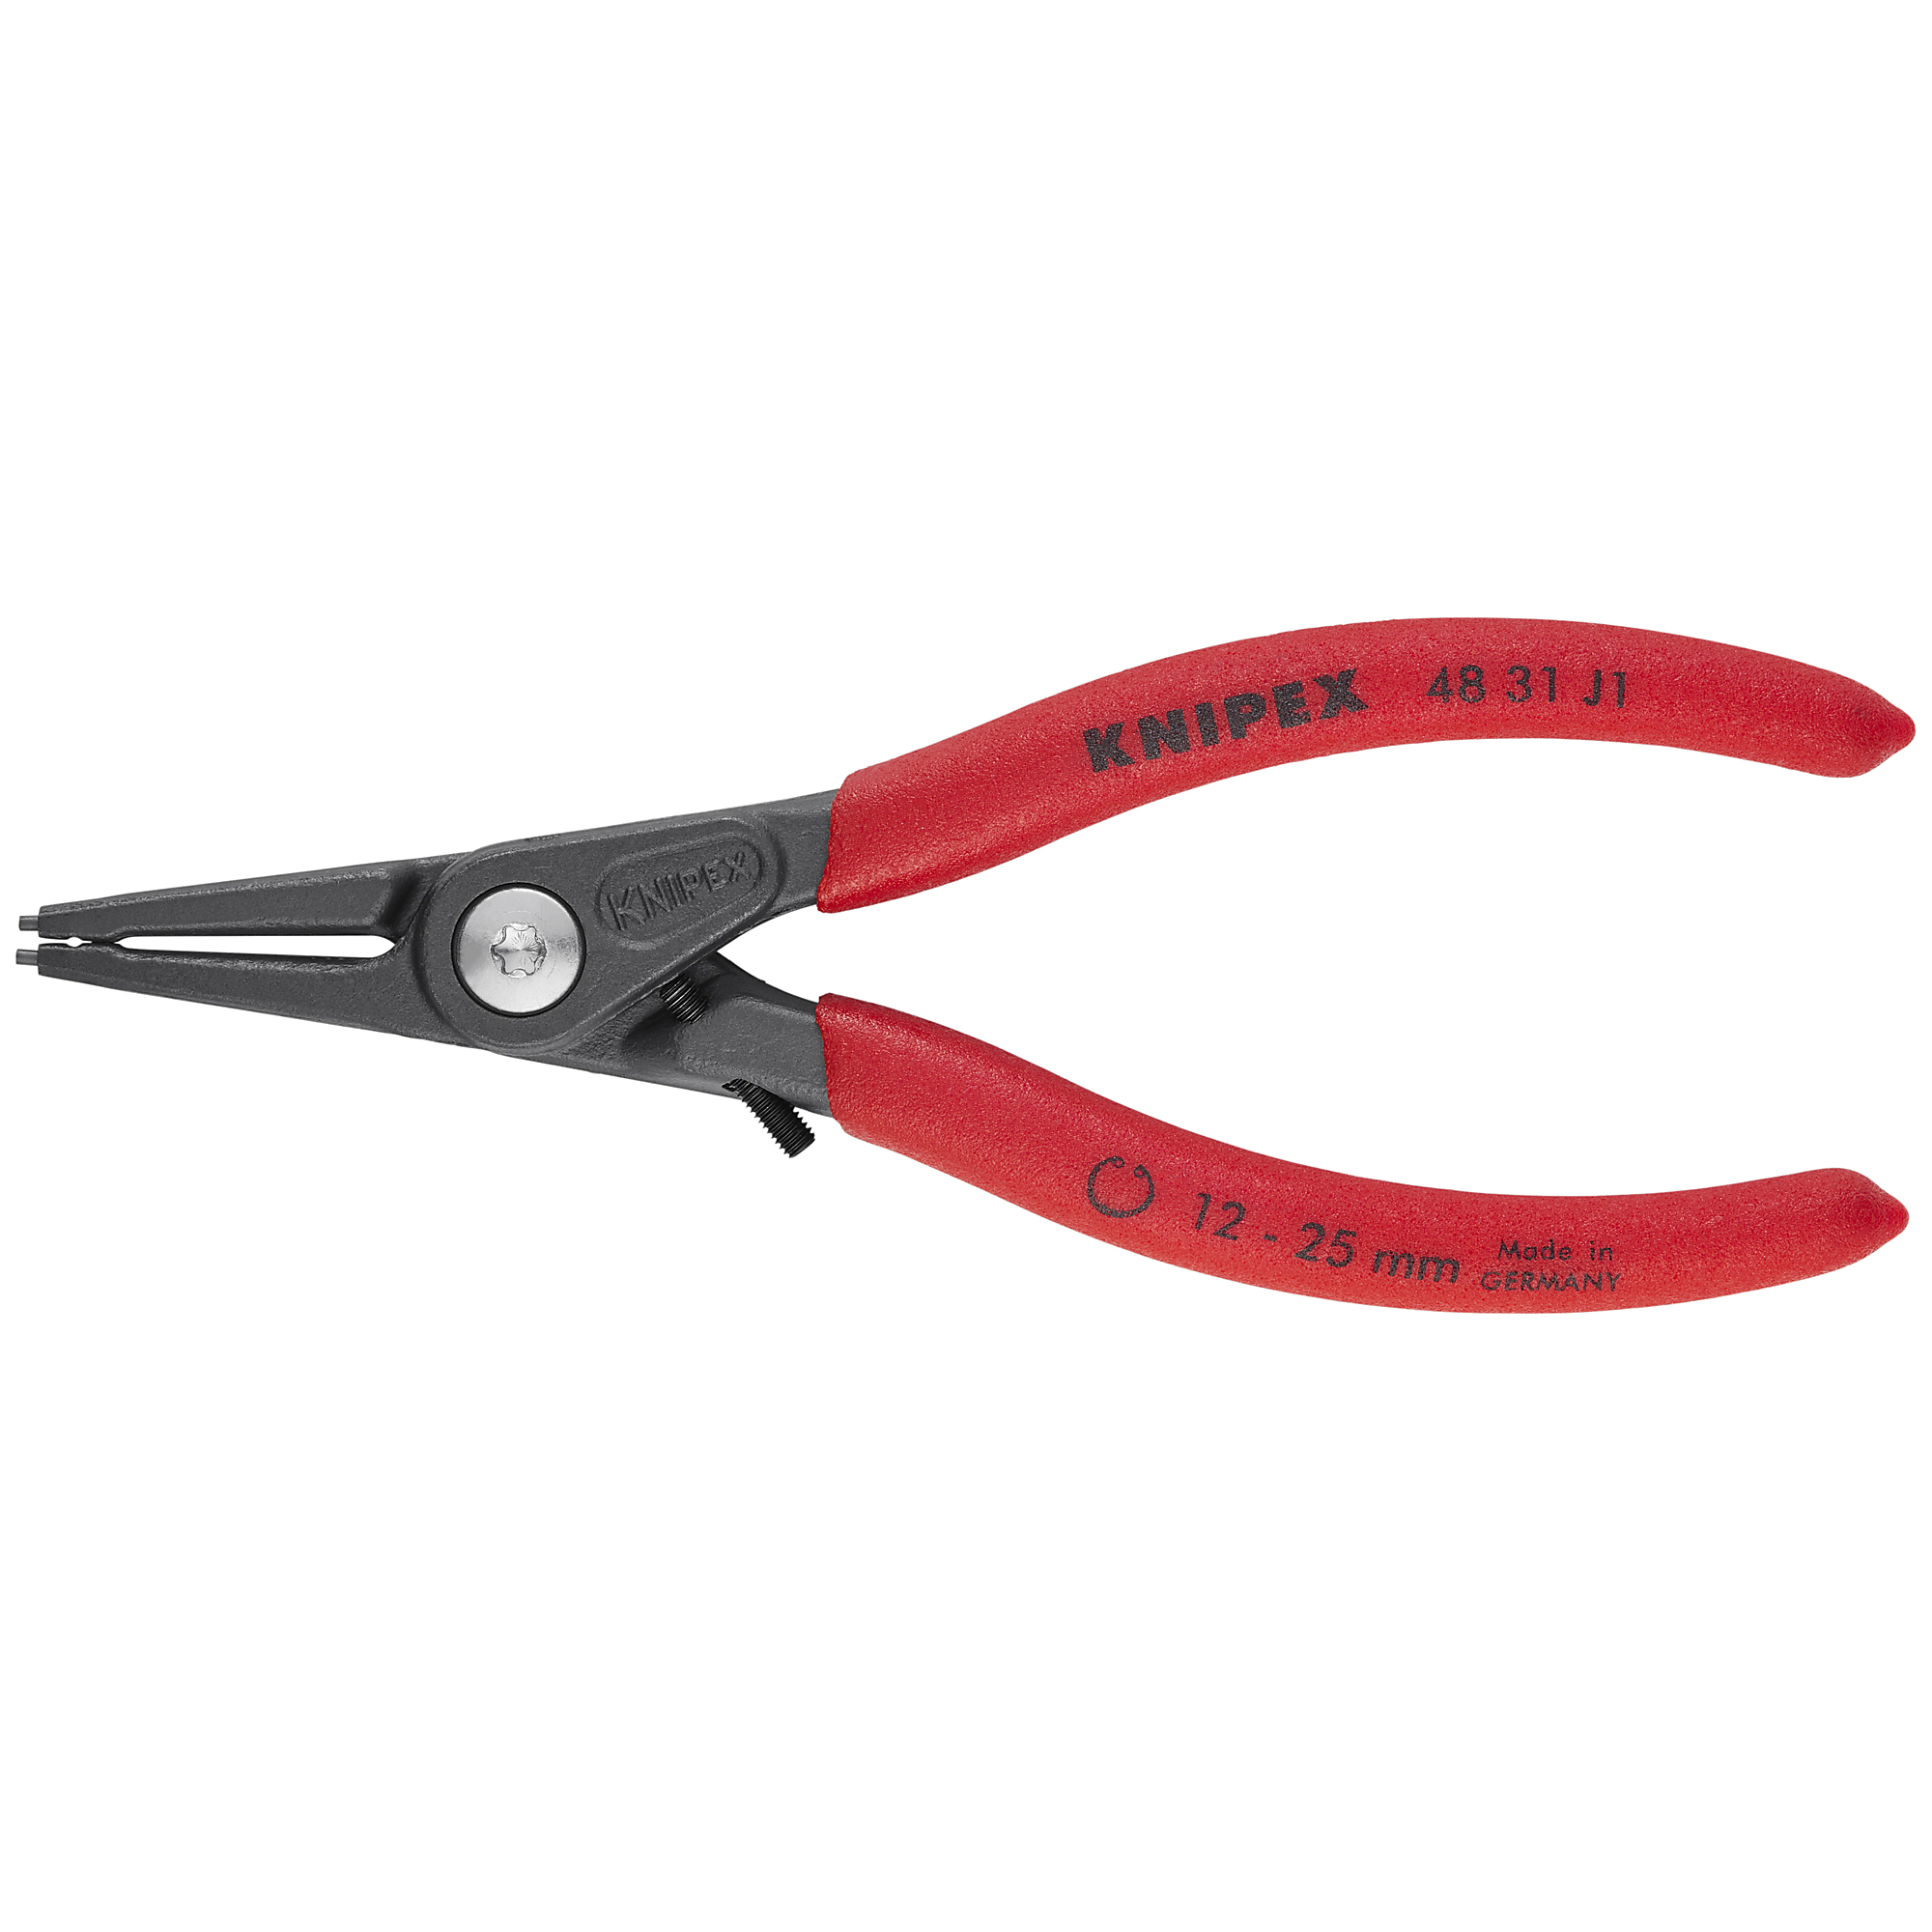 KNIPEX, Int Prec. Snap Ring Pliers-Limiter, 3/64 tip,5.5Inch, Pieces (qty.) 1 Material Steel, Model 48 31 J1